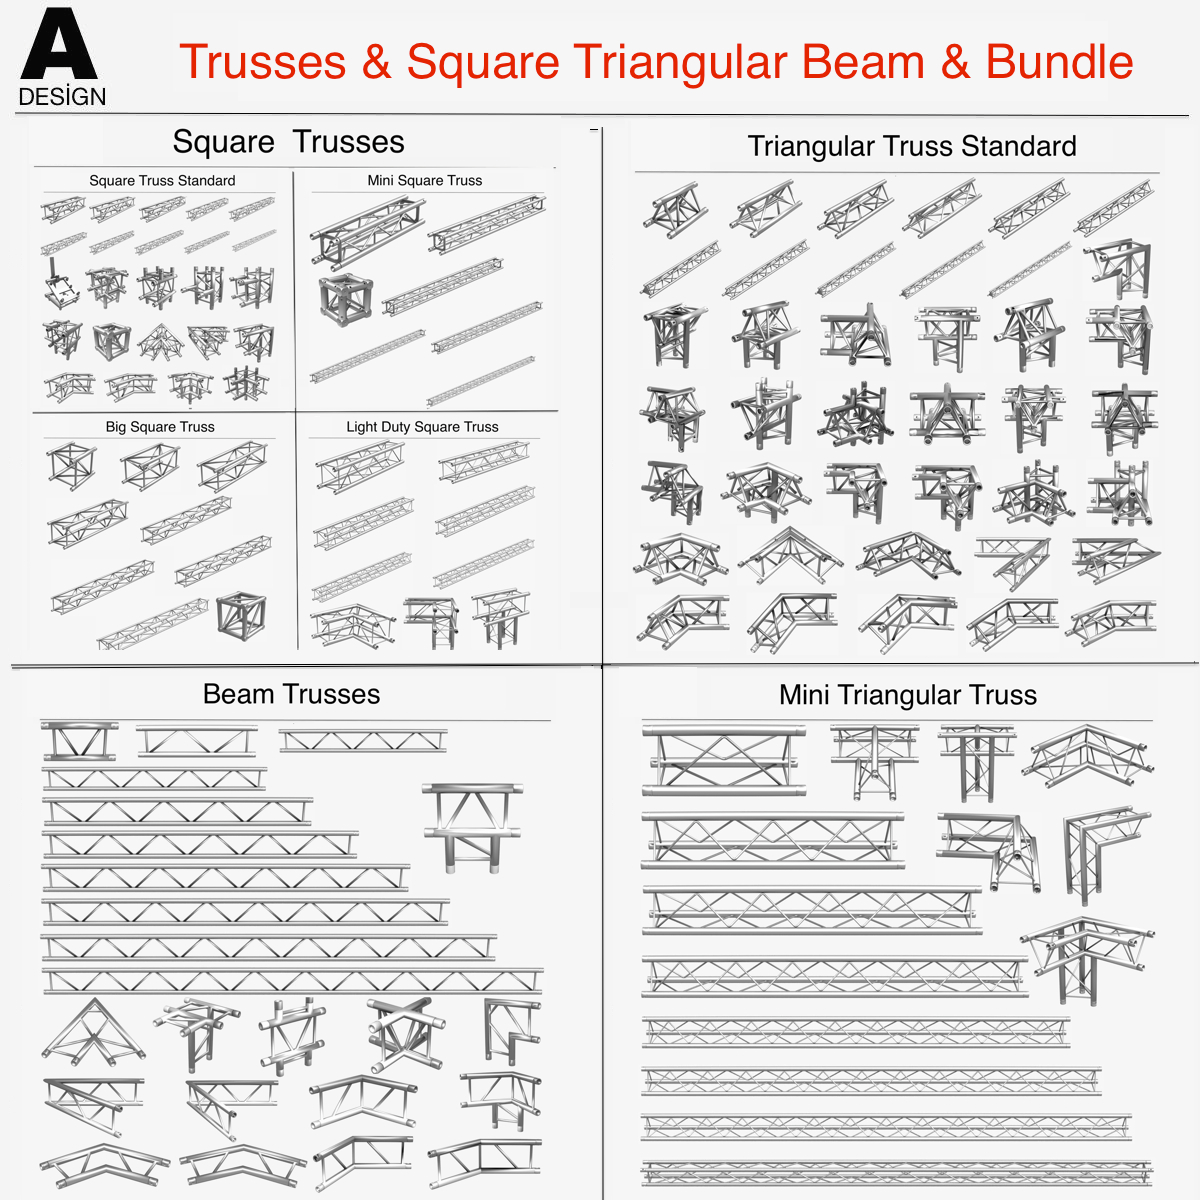 square triangular beam collection 170 modular 3d model 3ds max dxf fbx c4d dae  texture obj 268349